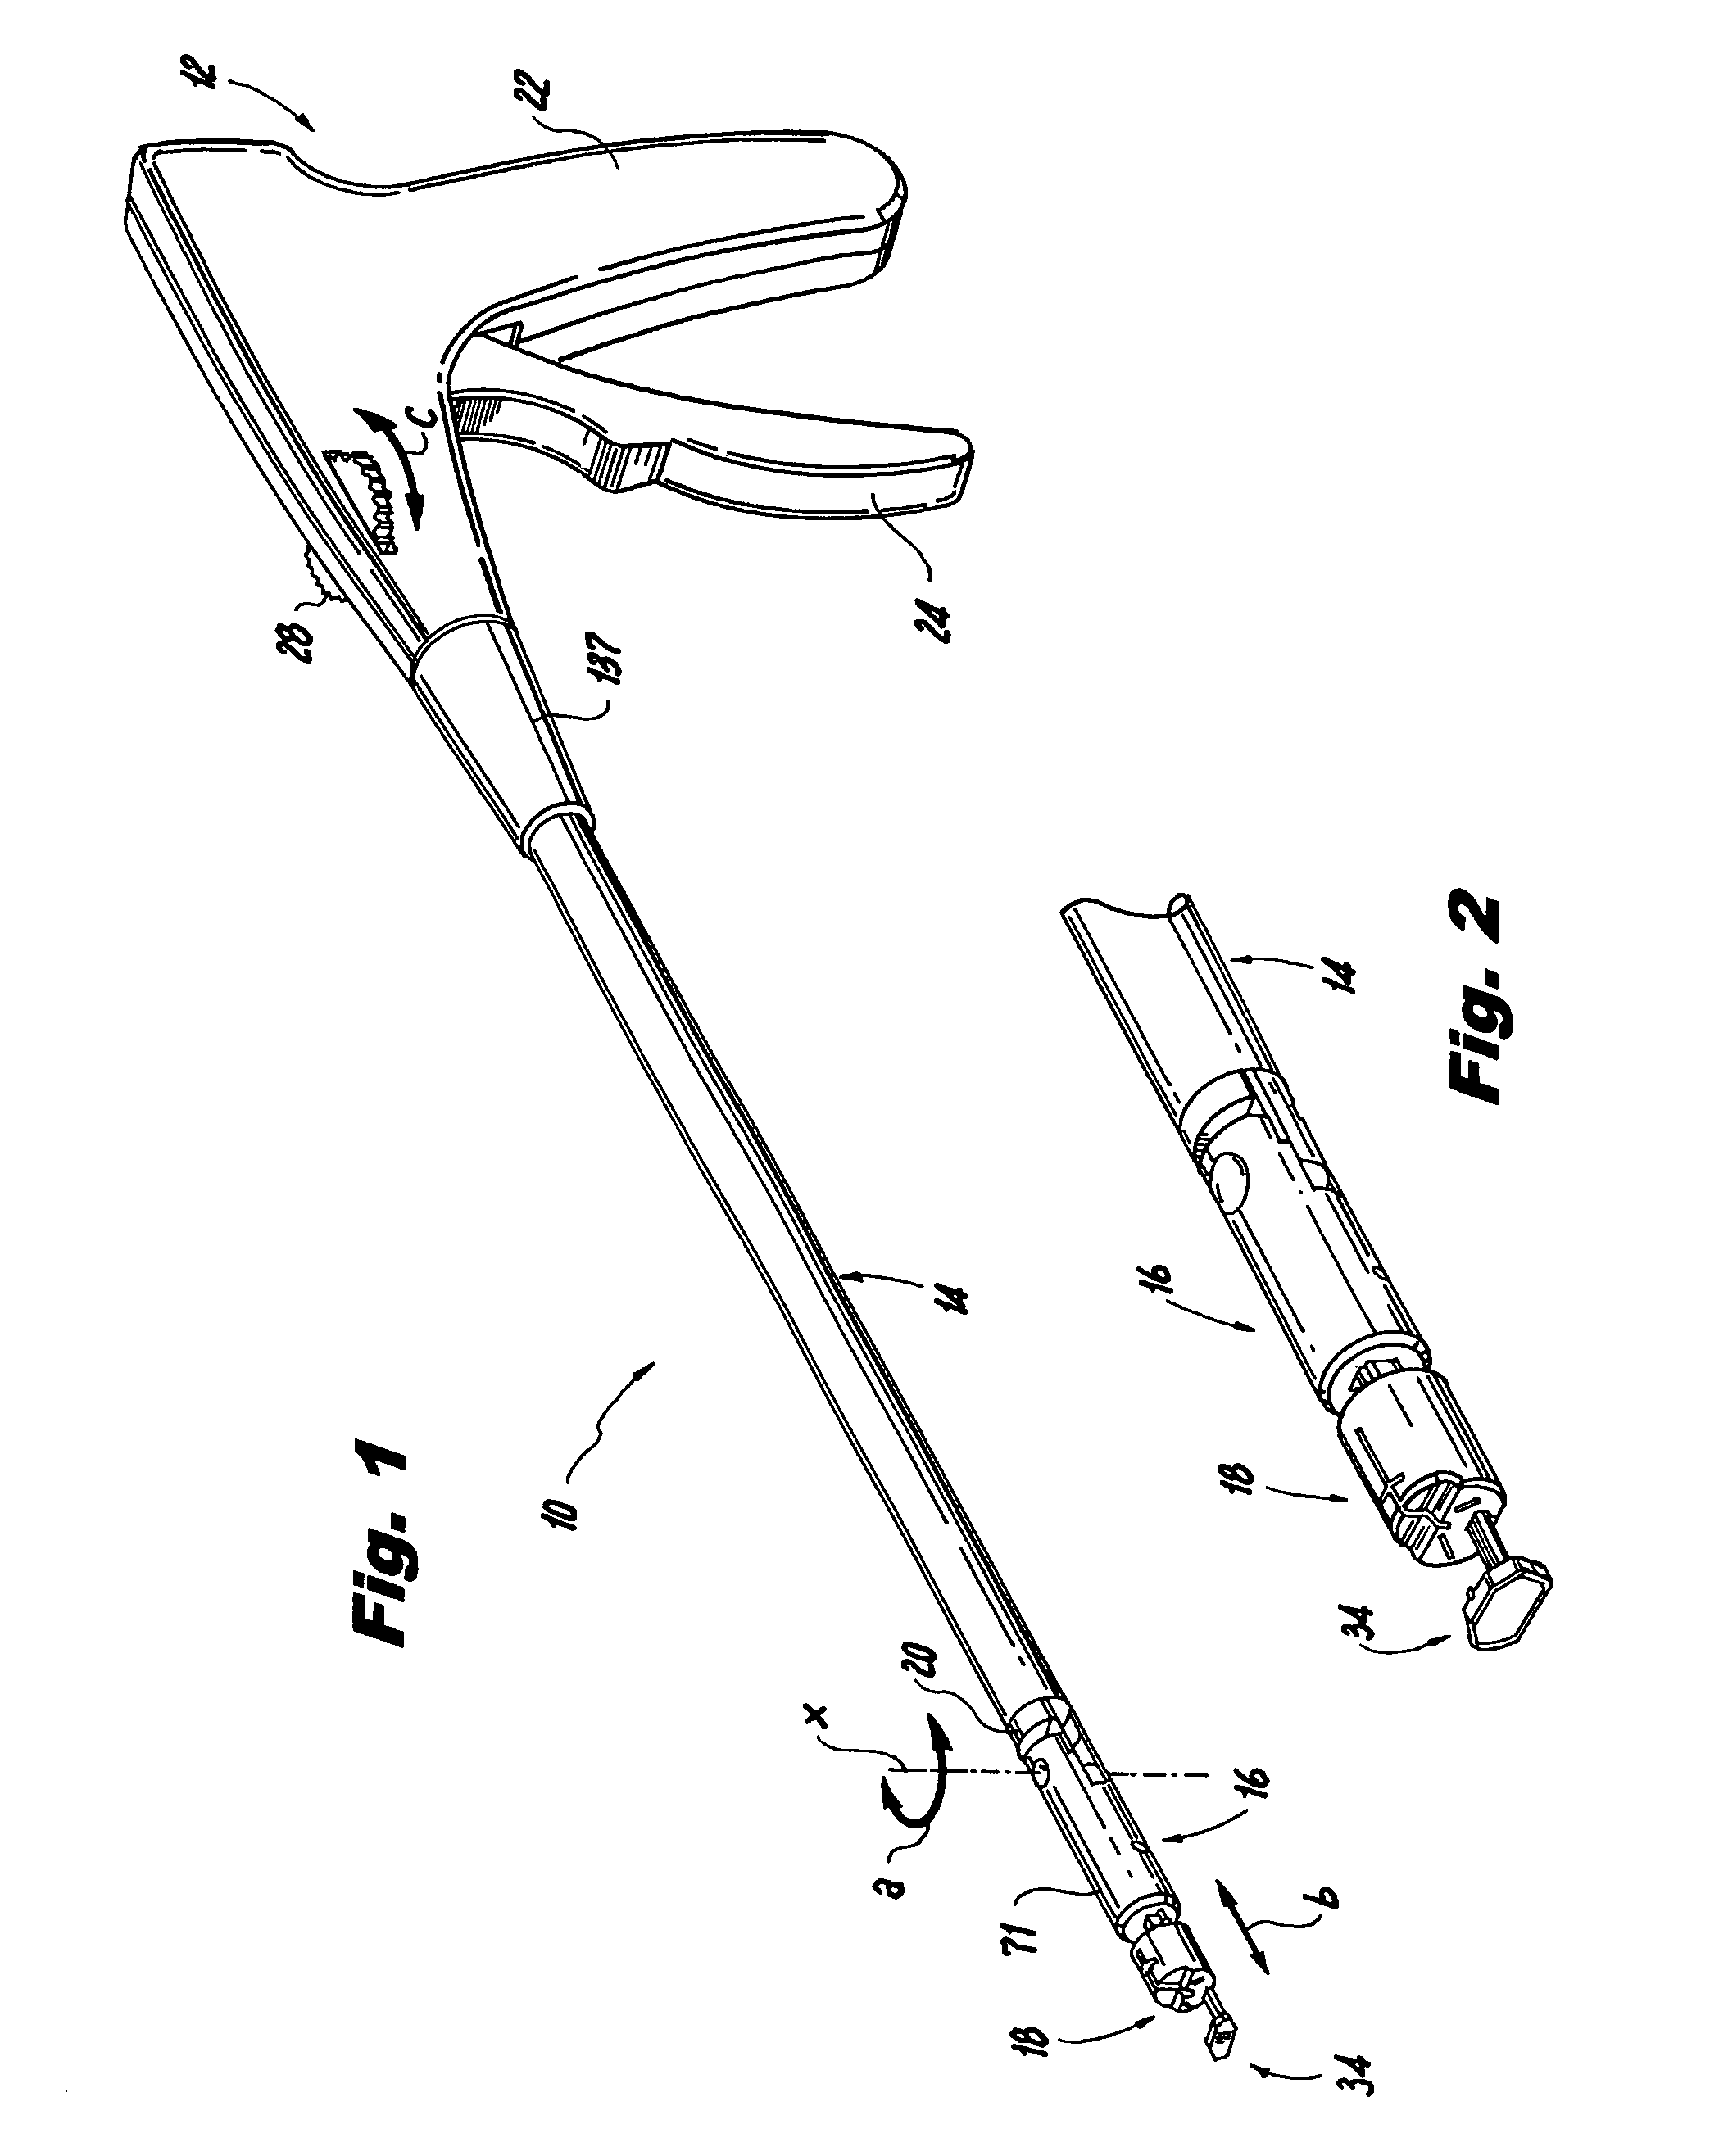 Apparatus for stapling and incising tissue